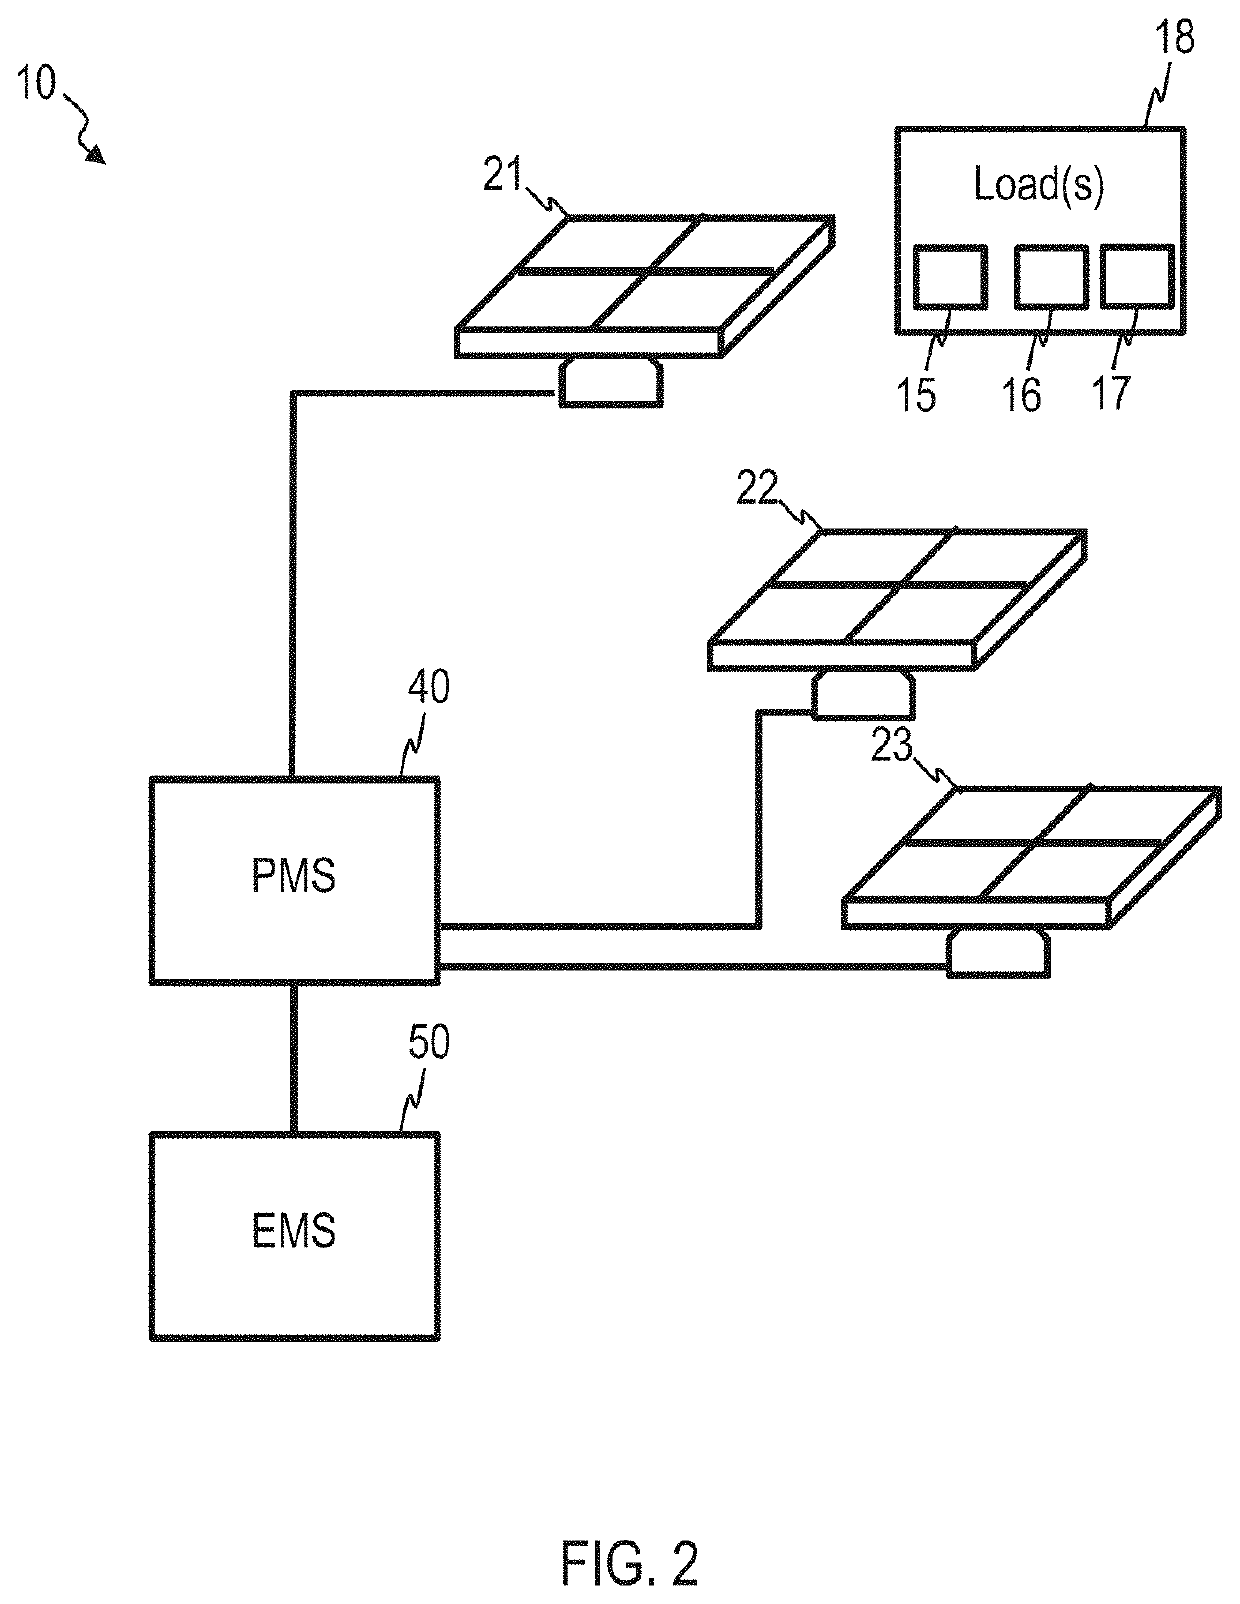 Method of controlling a microgrid, power management system, and energy management system